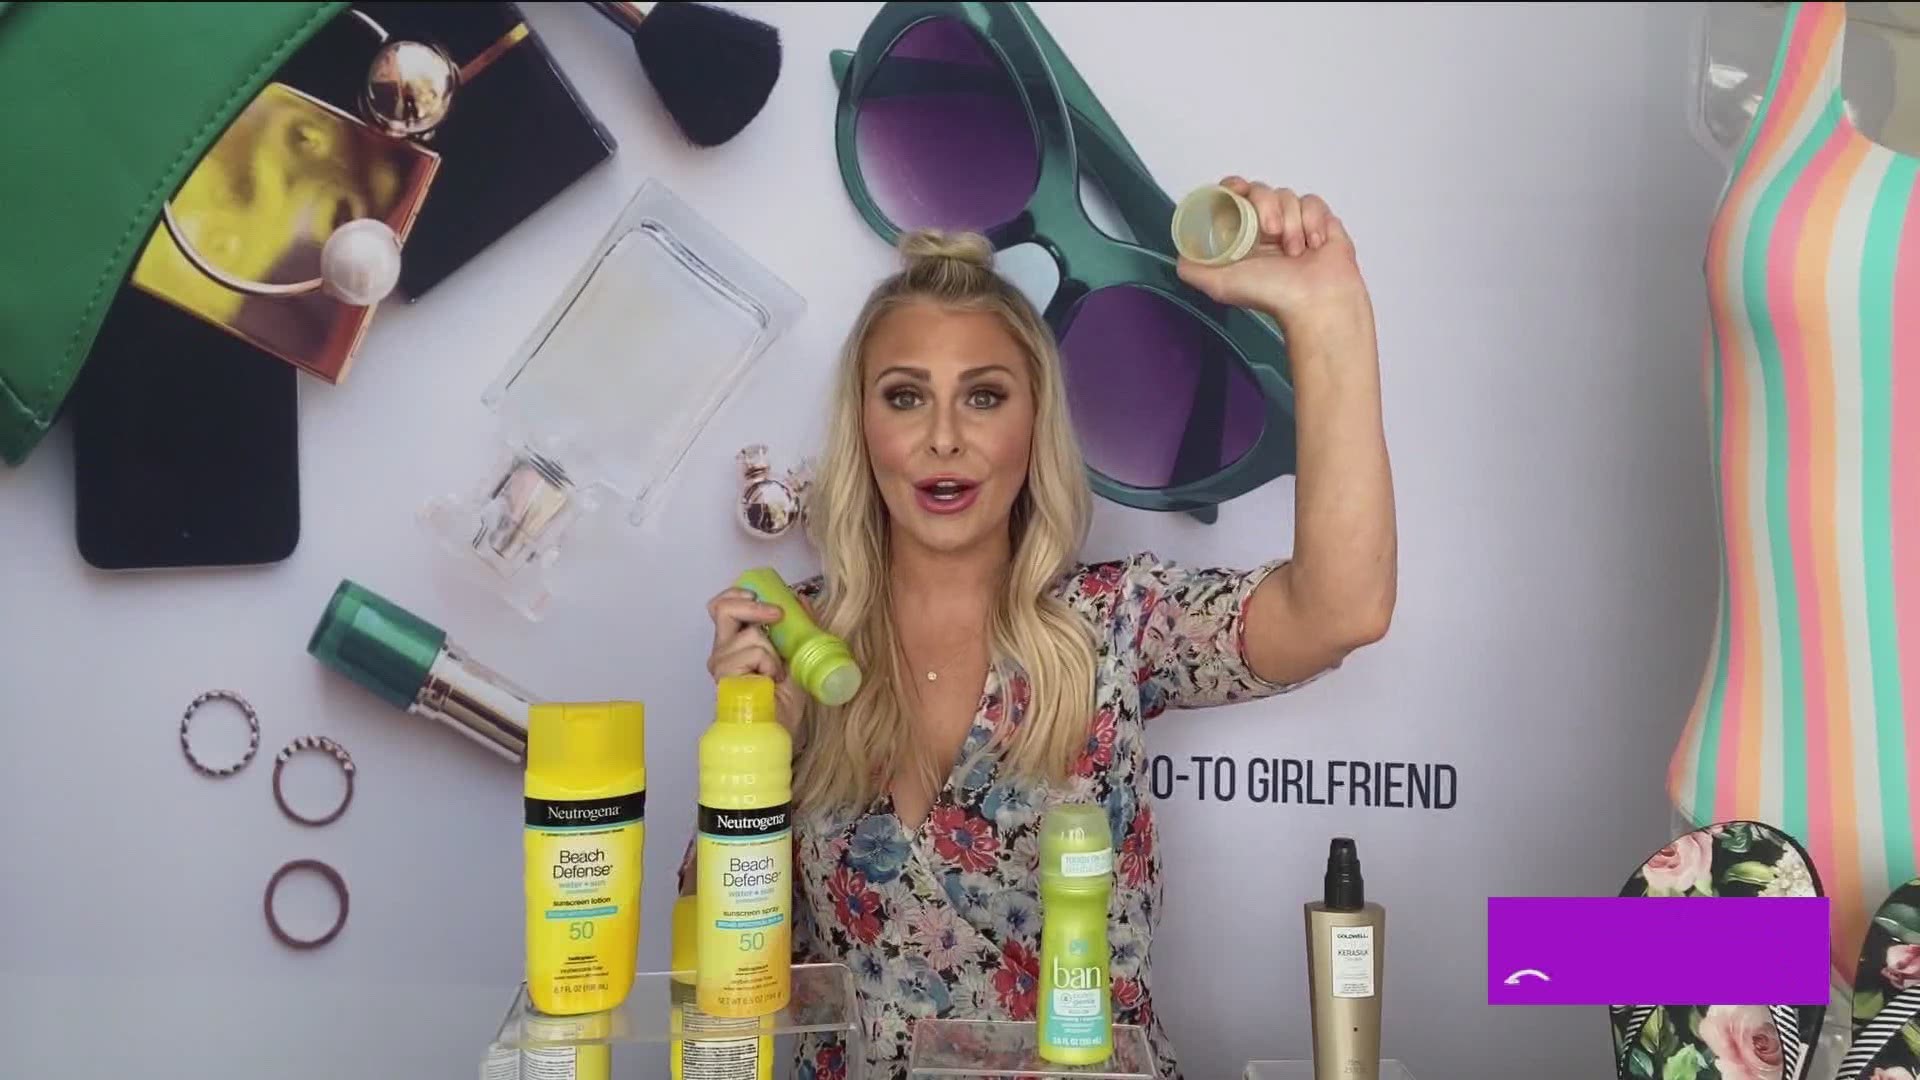 Our favorite go-to-girlfriend dishes on her favorite summer must-haves for this season!